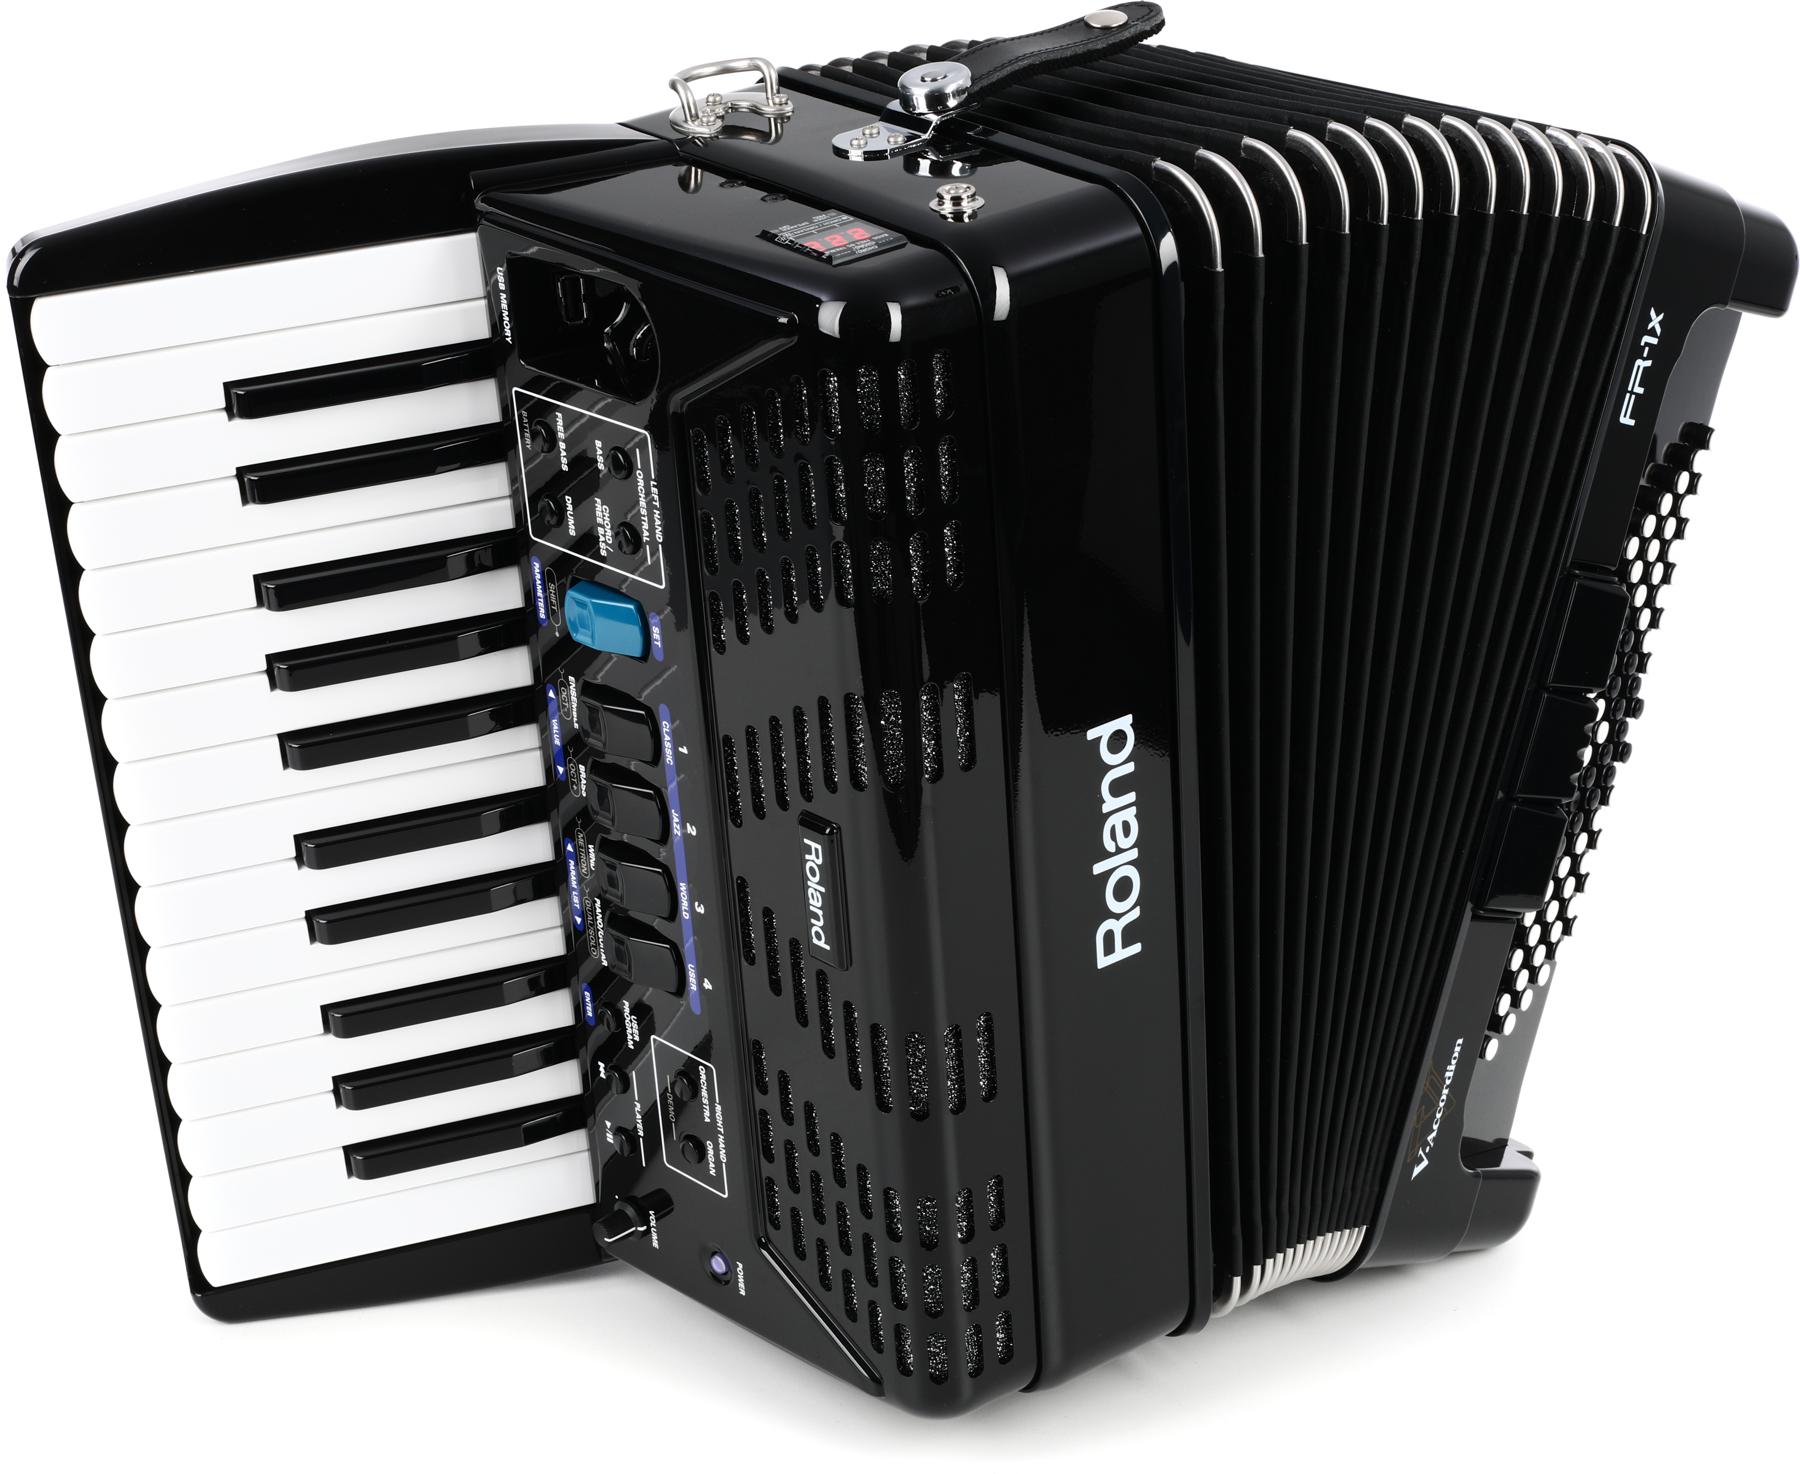 3. Roland FR-1X Premium V-Accordion Lite with 26 Piano Keys and Speakers, Black